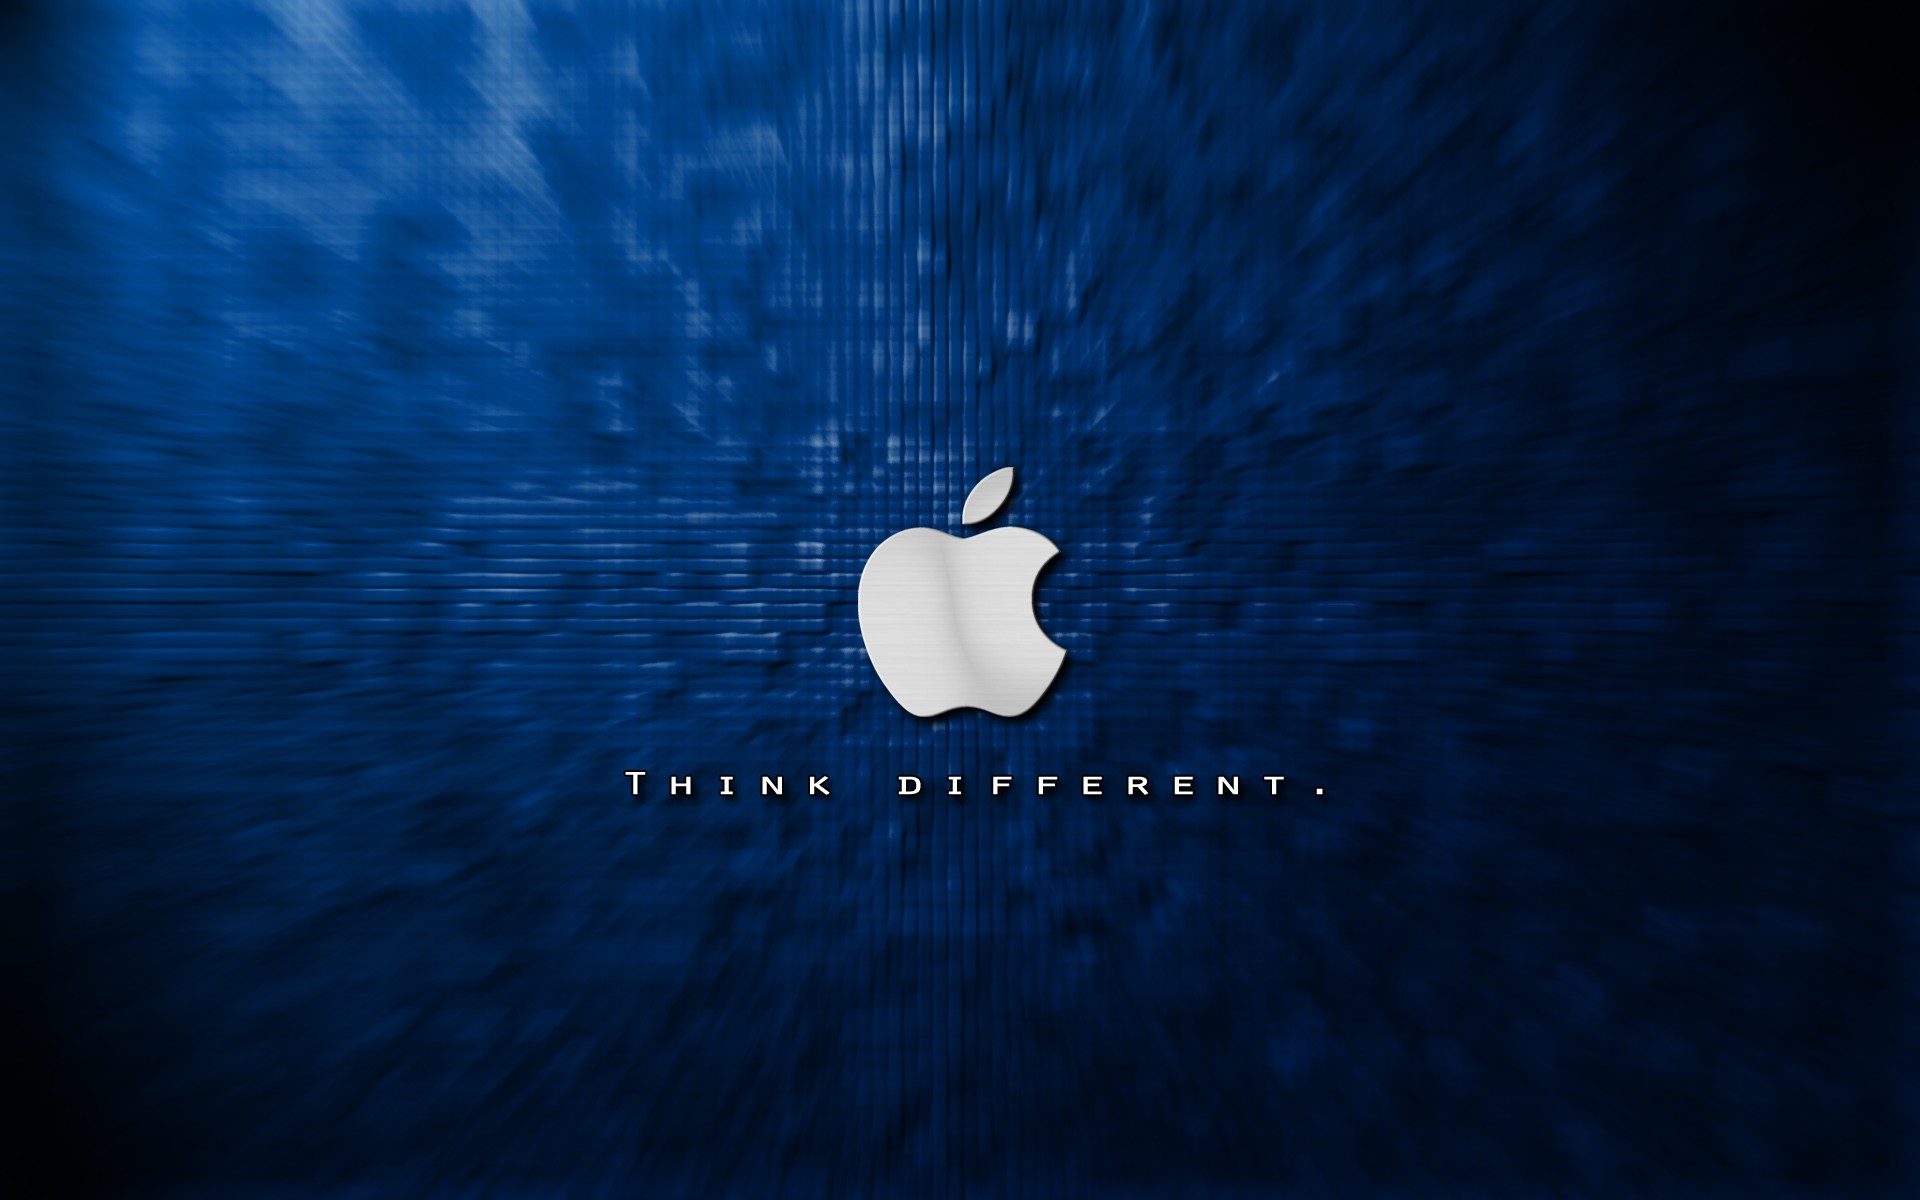 Blue Apple Logo Wallpaper Image Amp Pictures Becuo